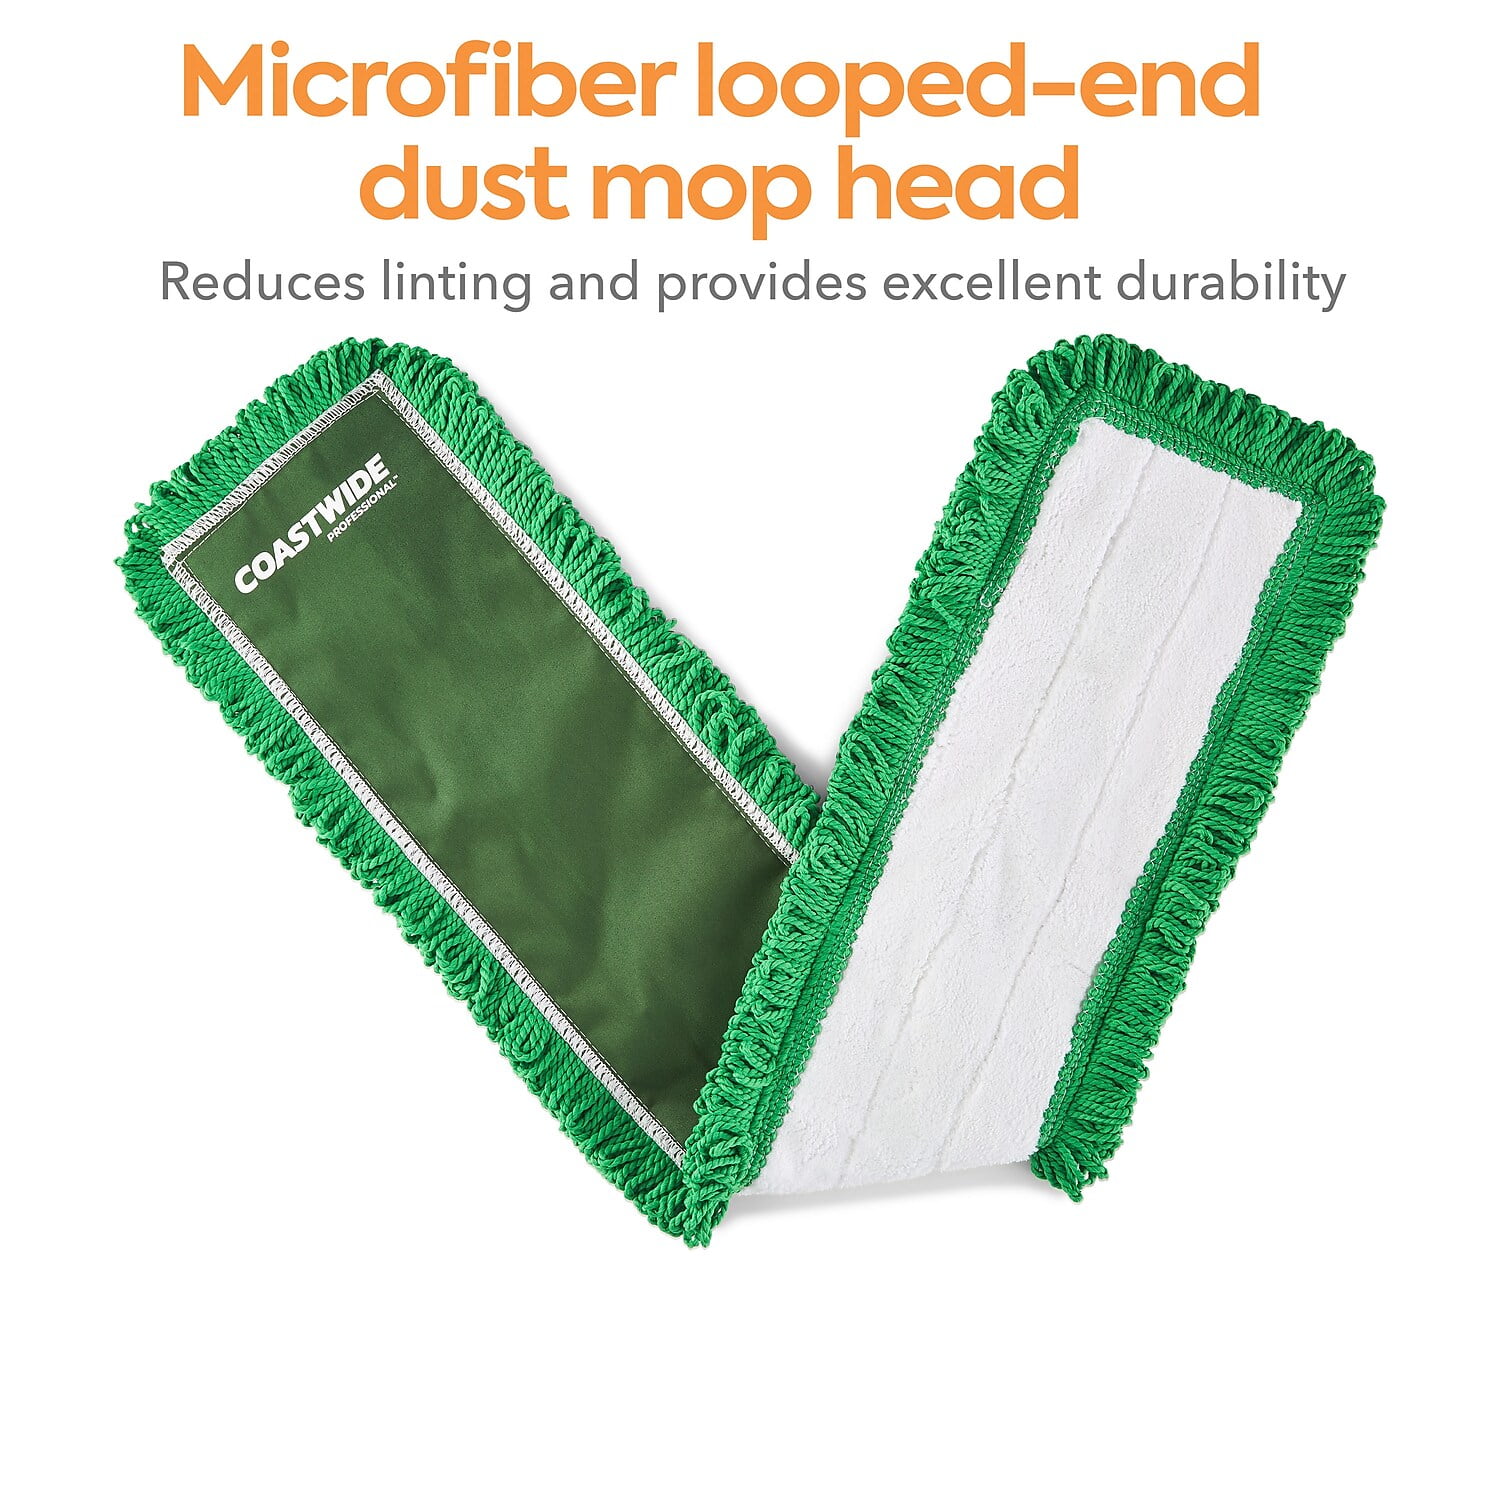 Details about   COASTWIDE Looped-End Dust Mop Head Microfiber 24" x 5" Green CW56770 